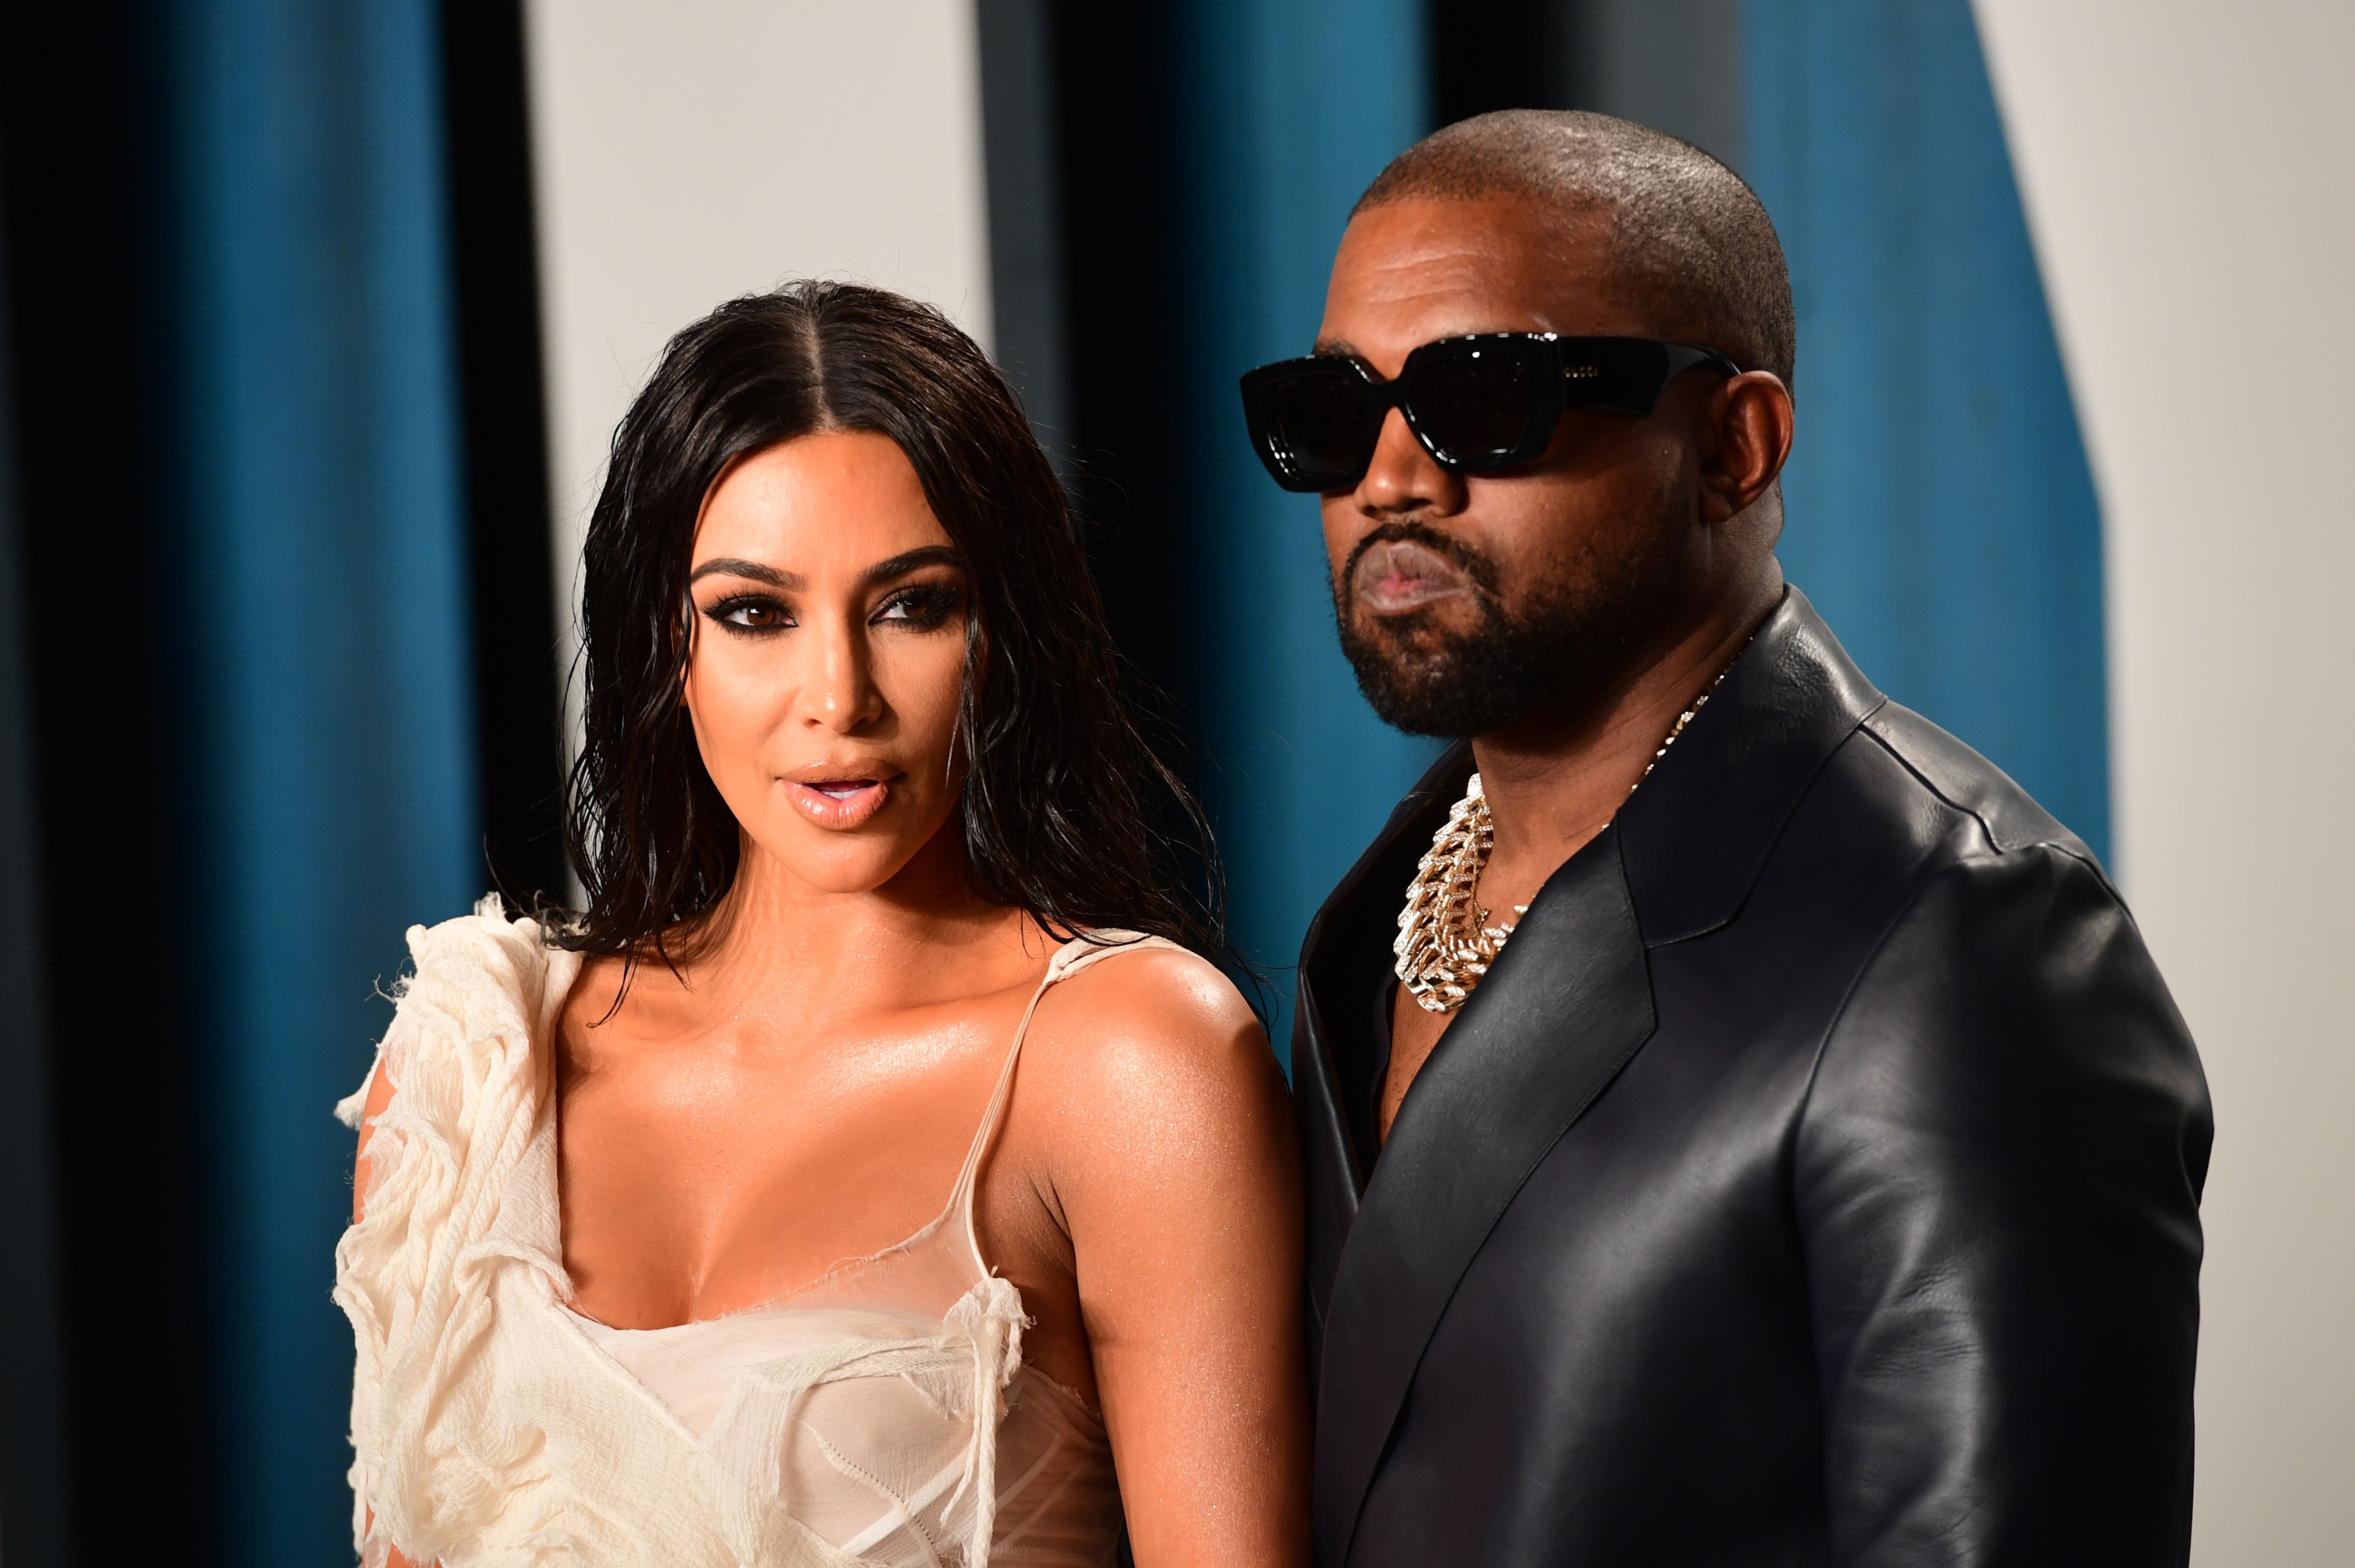 Kim Kardashian and Kanye West at the Vanity Fair Oscar Party in February 2020 | Source: Getty Images